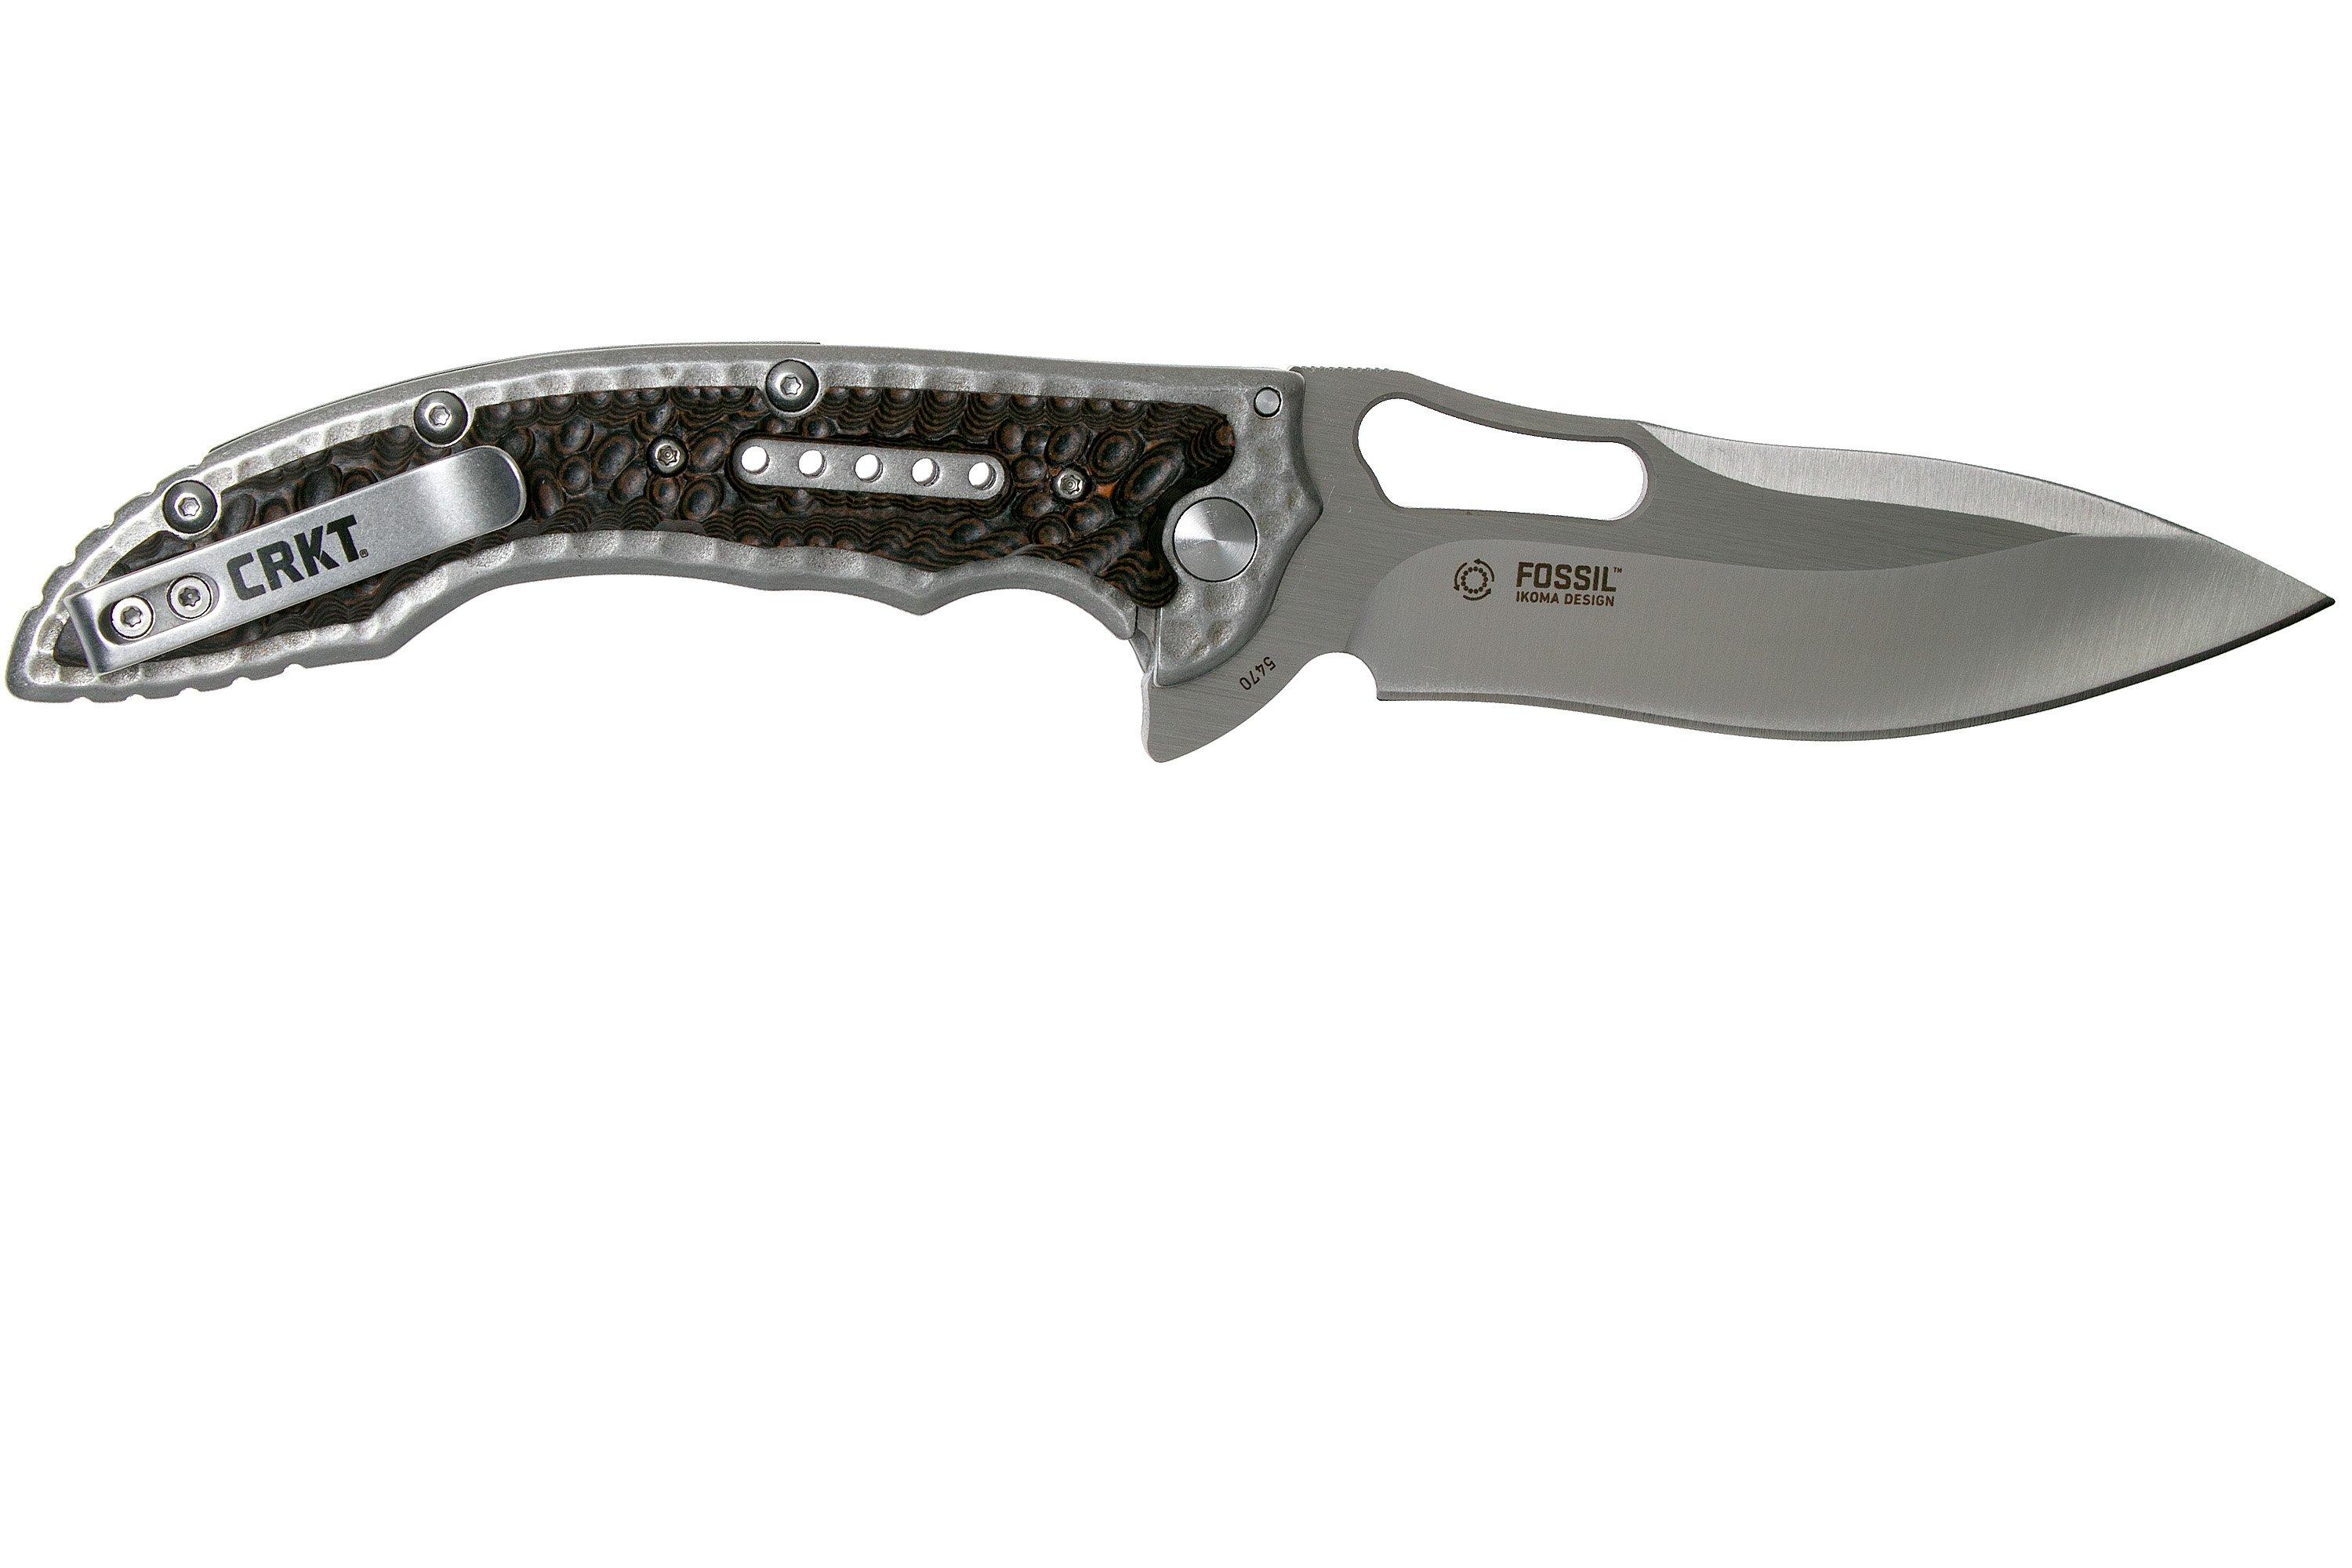 CRKT Fossil - 5470 | Advantageously shopping at 